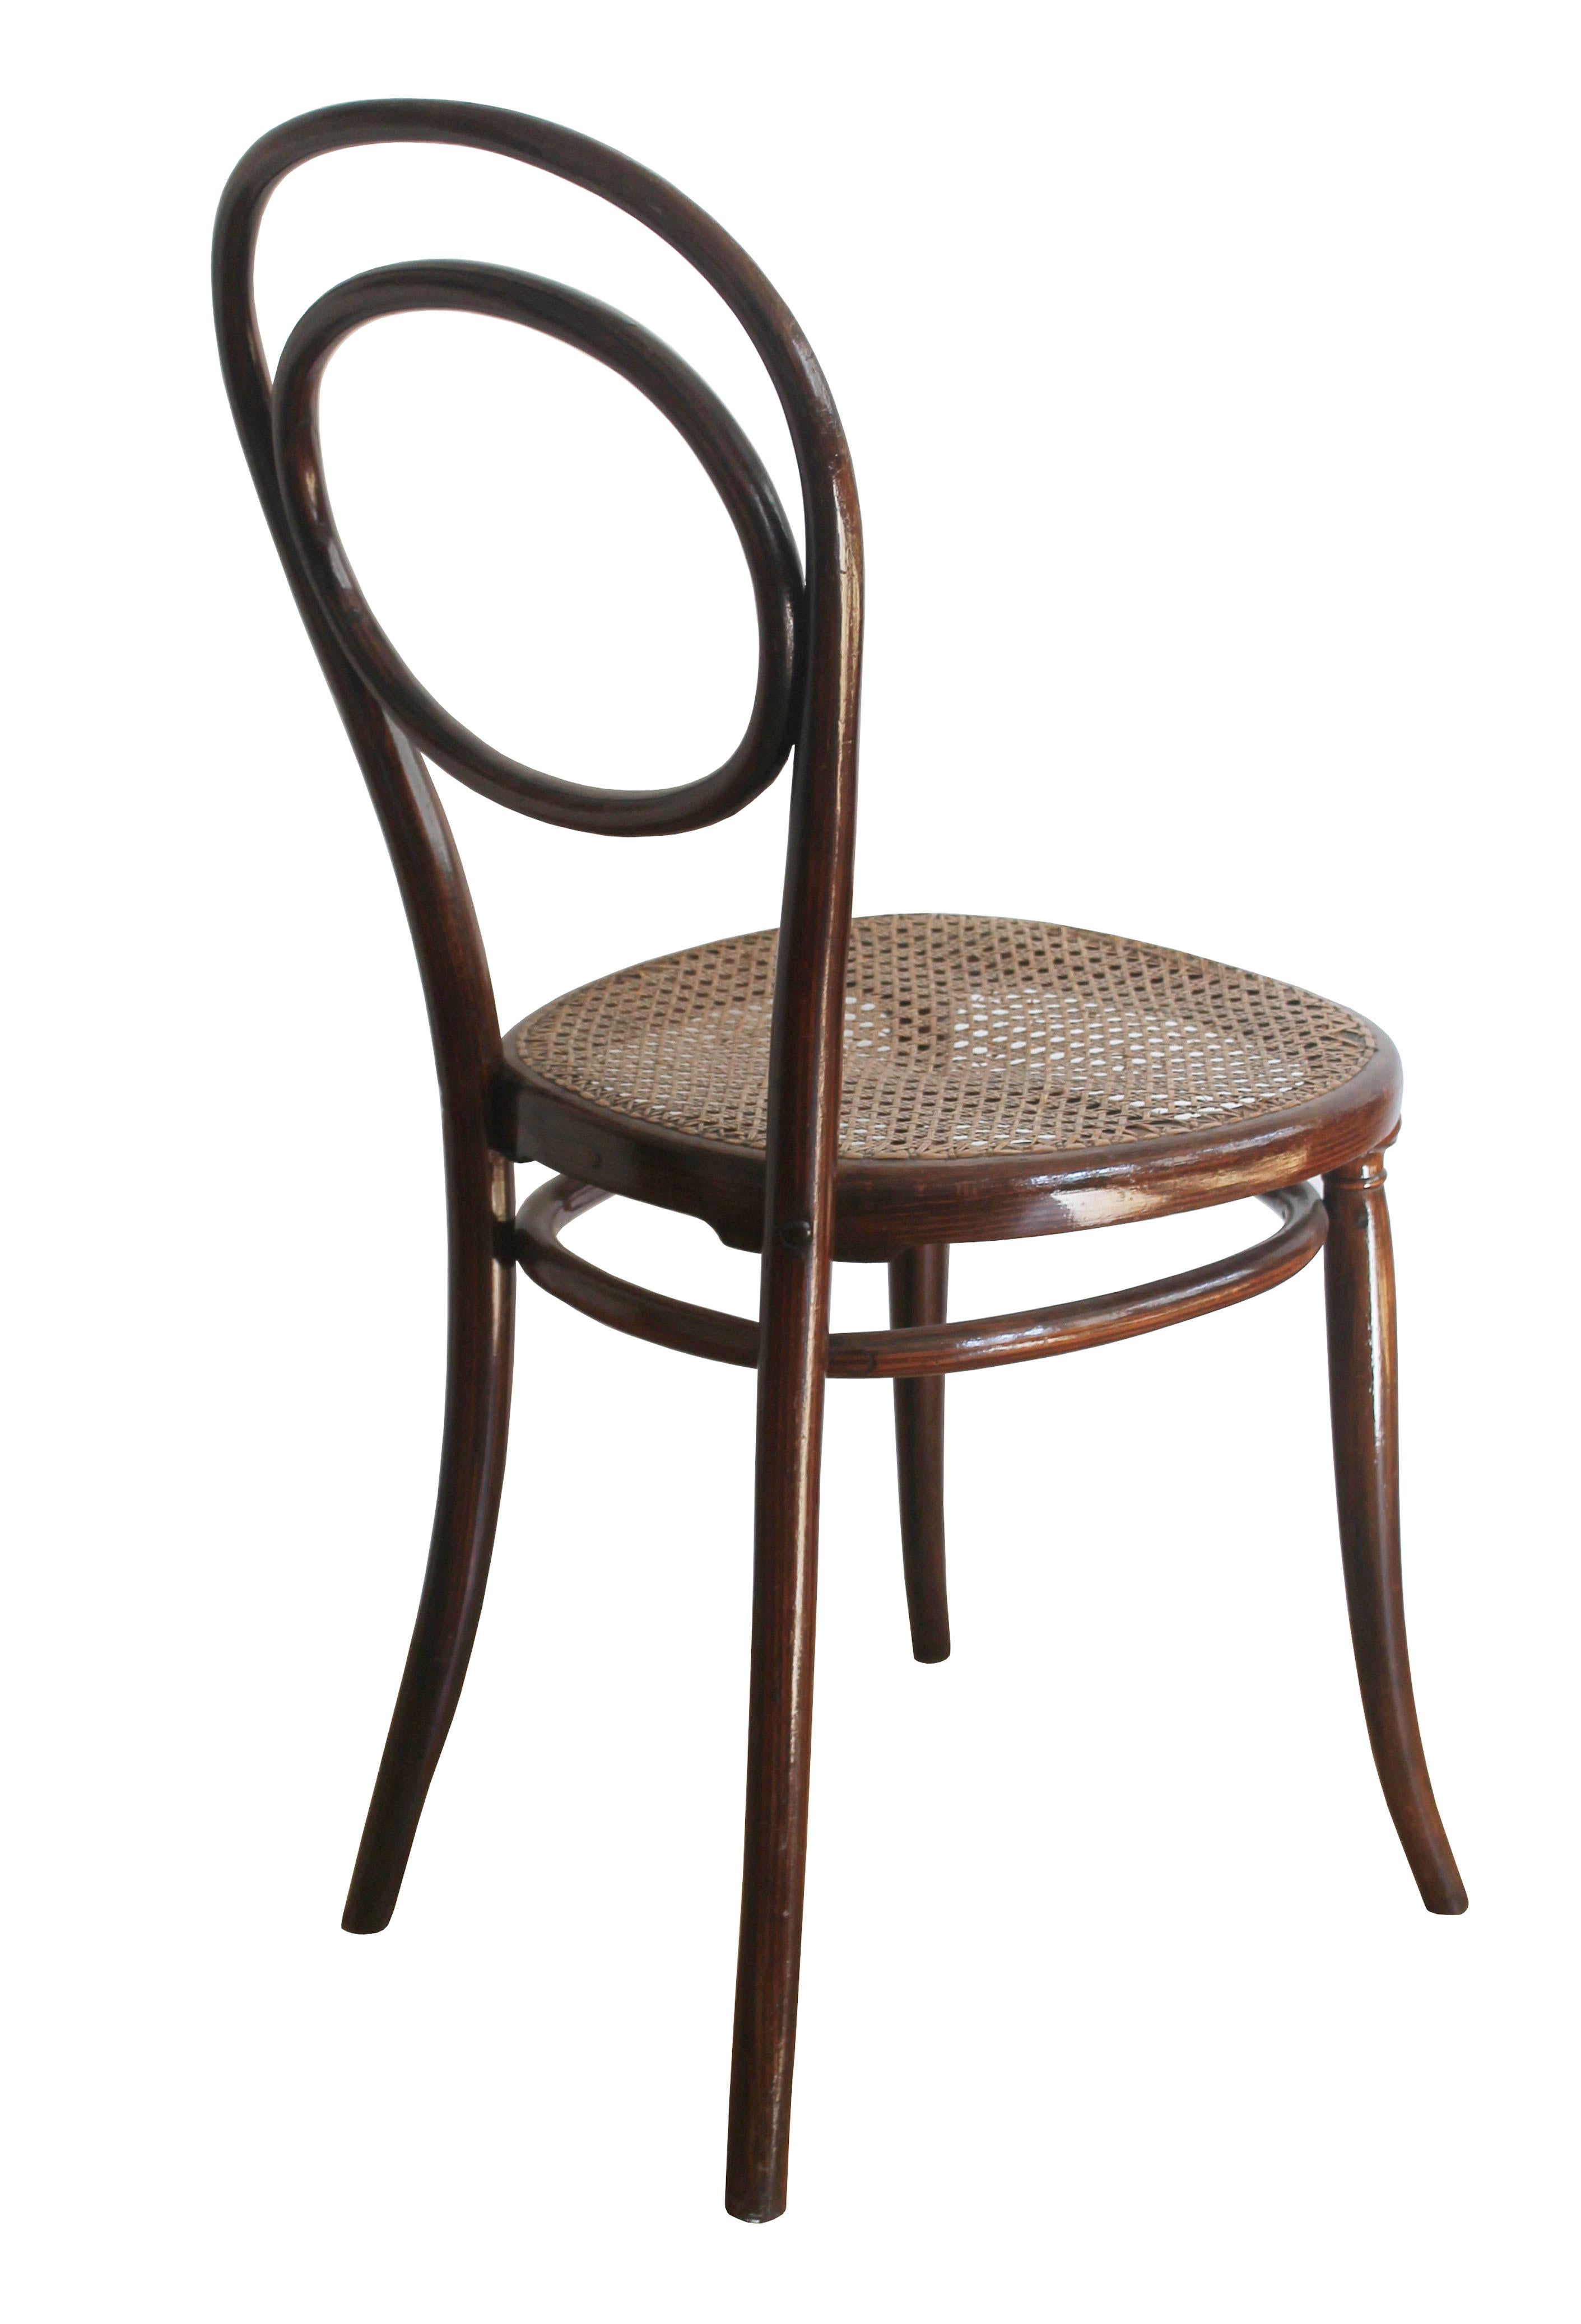 Art Nouveau Thonet Dining Chair Model No.10 from the 1880's For Sale